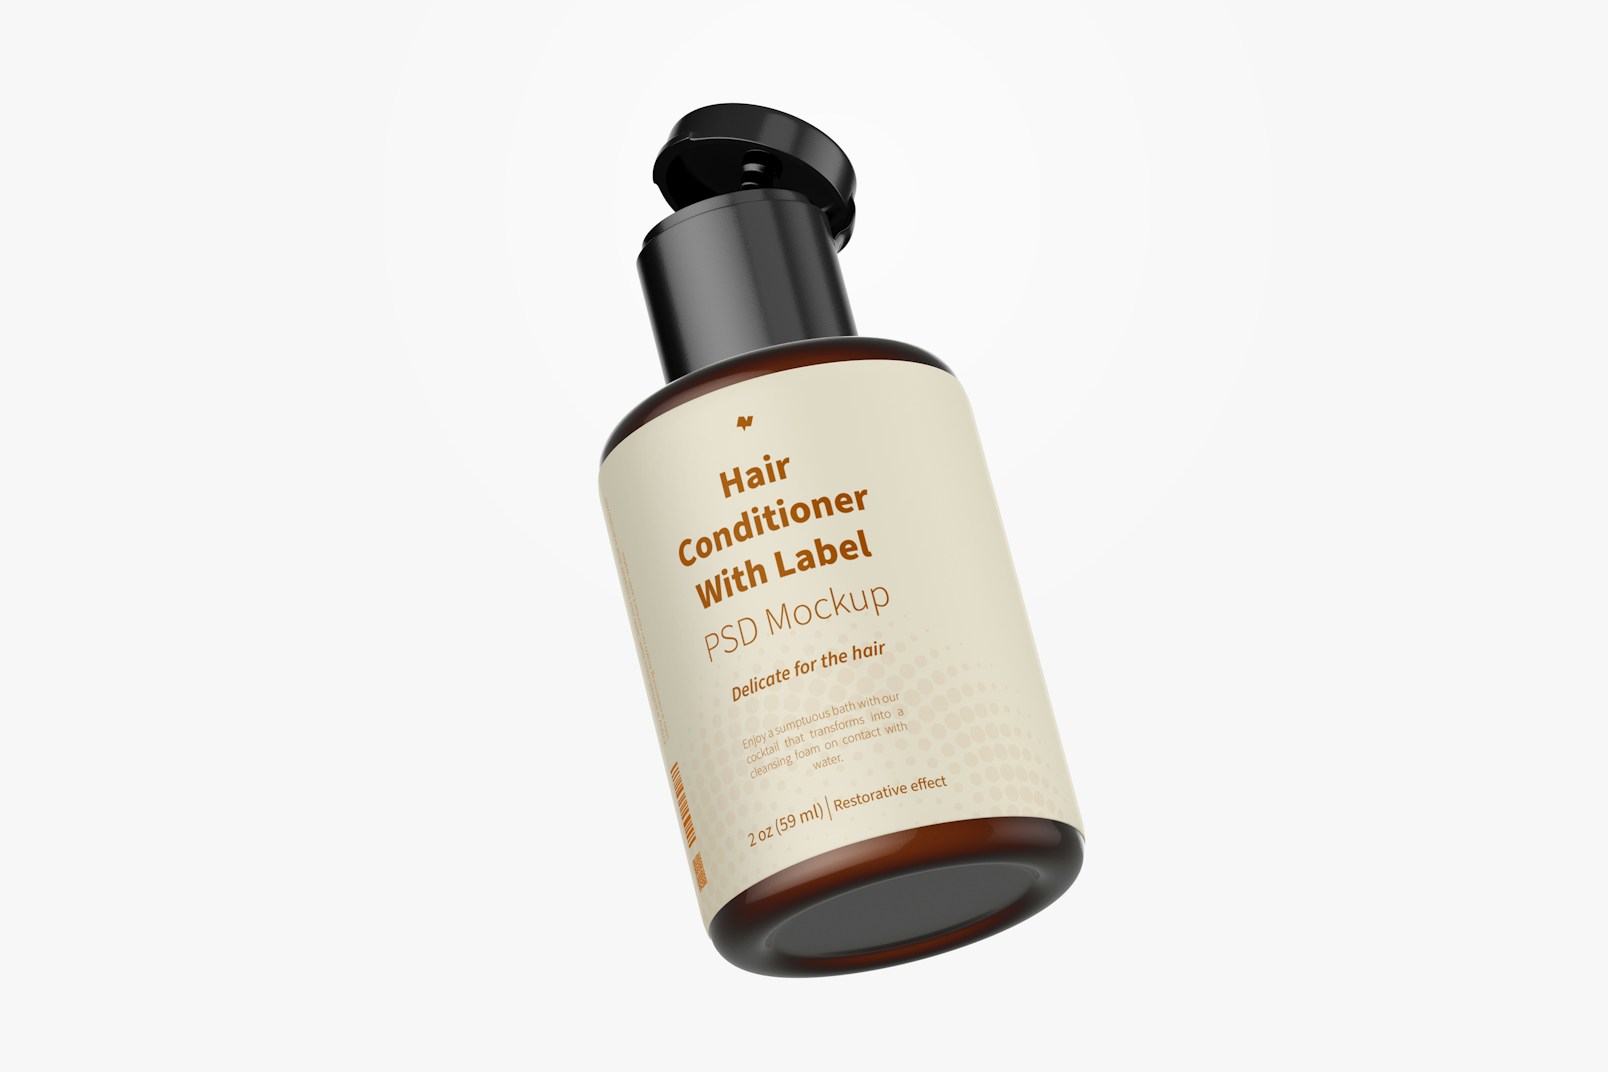 2 Oz Hair Conditioner with Label Mockup, Floating